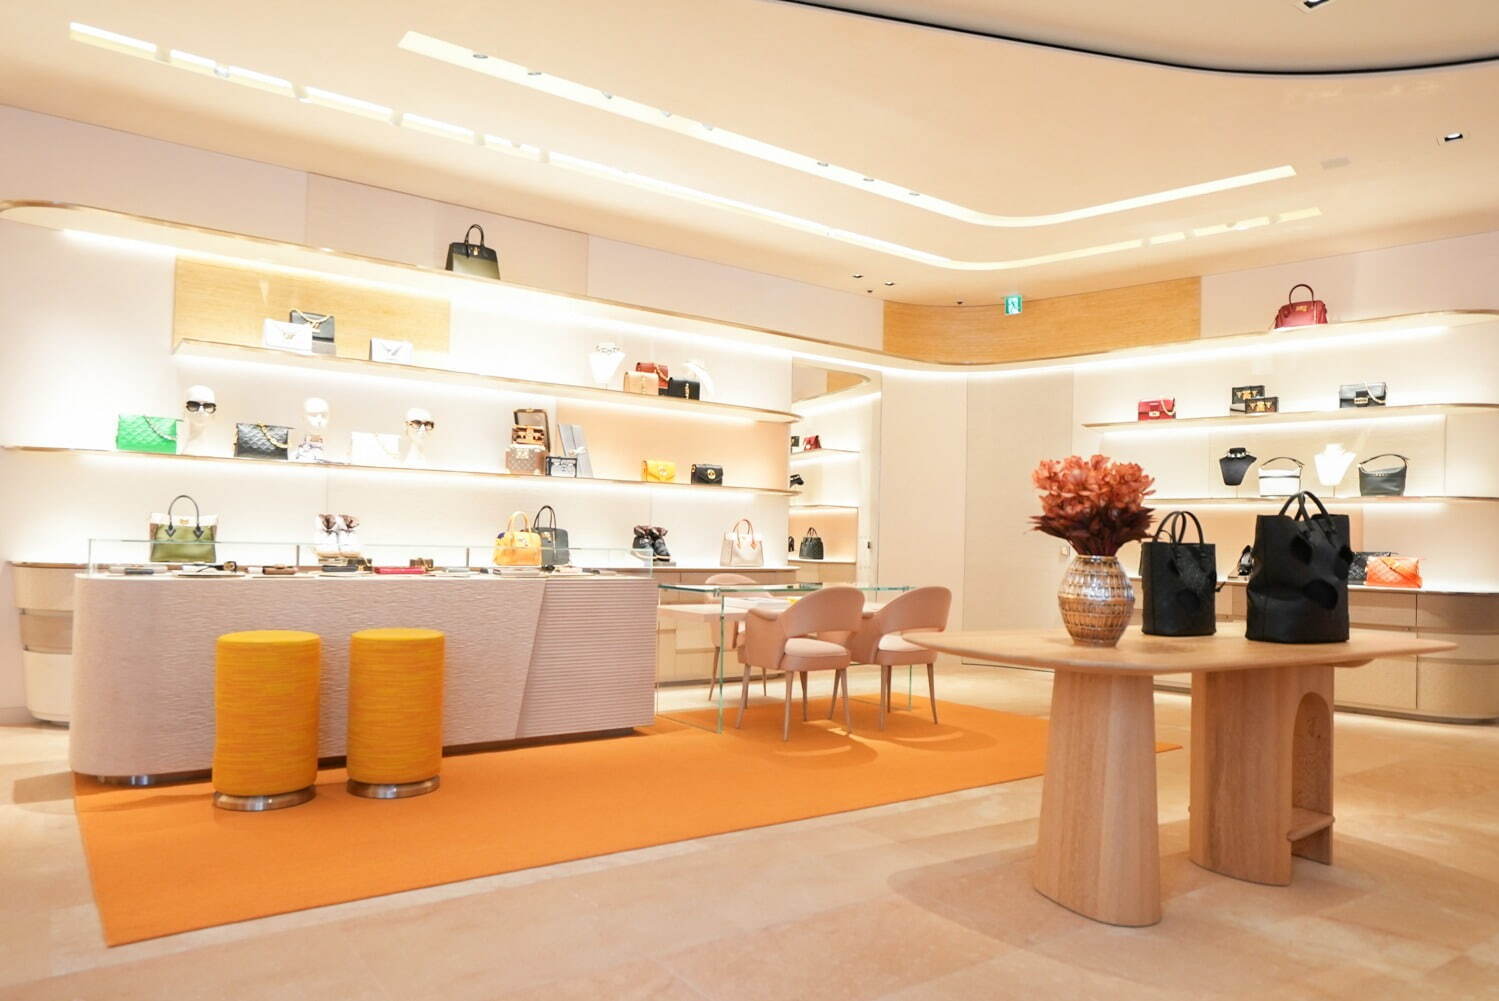 An Exclusive Look Inside the Louis Vuitton Ginza Namiki Boutique